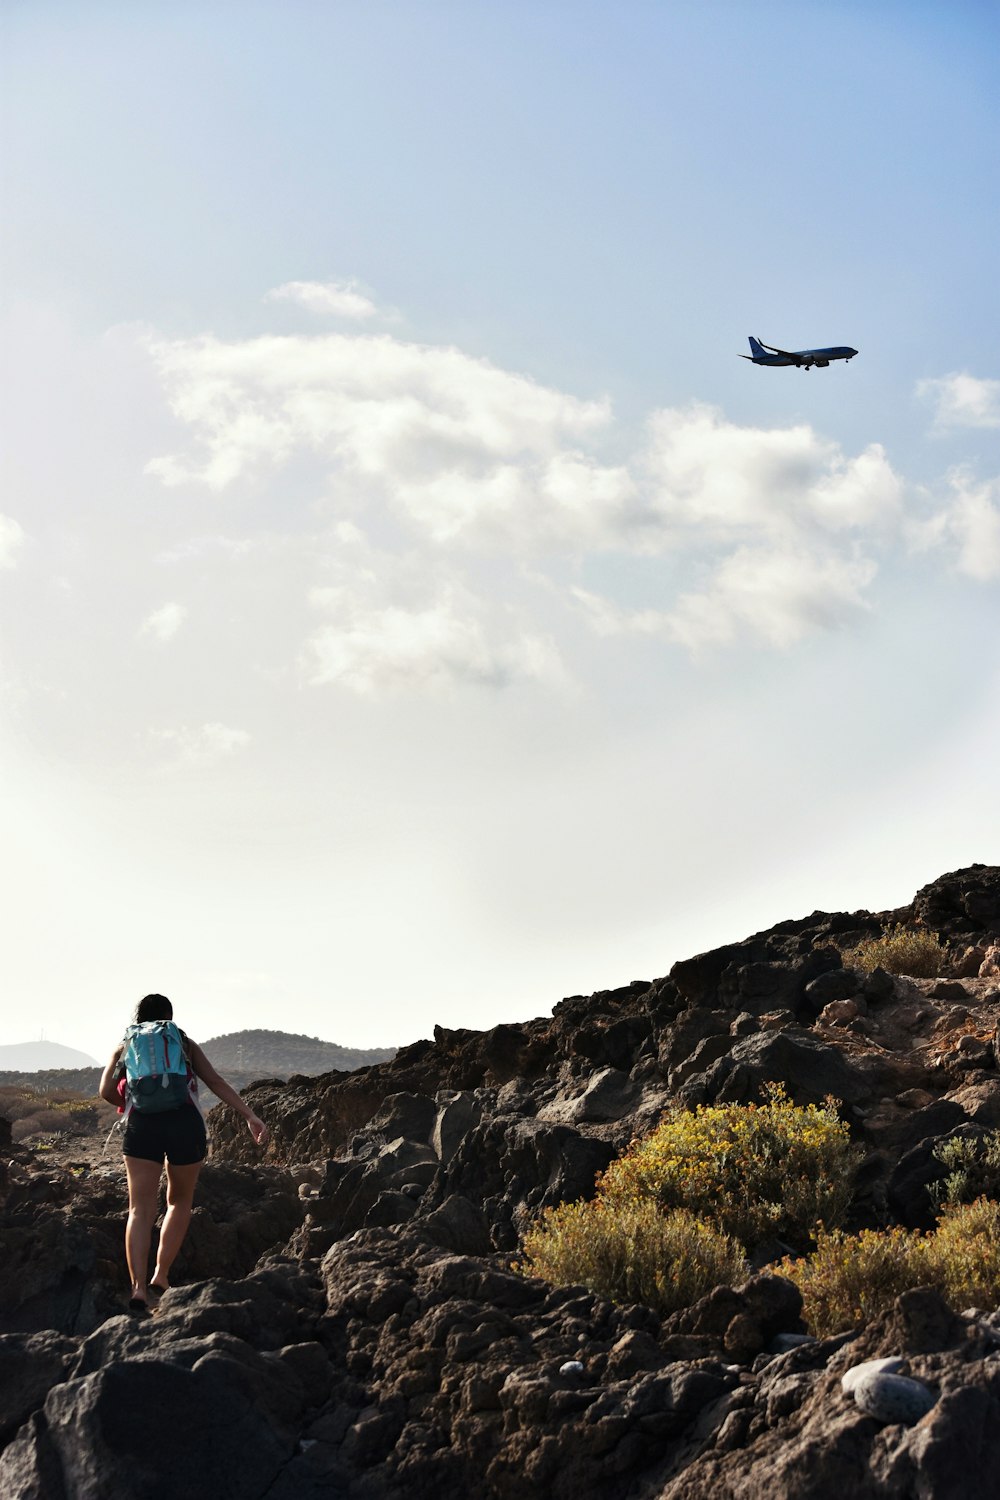 woman walking on rocks with airplane passing by